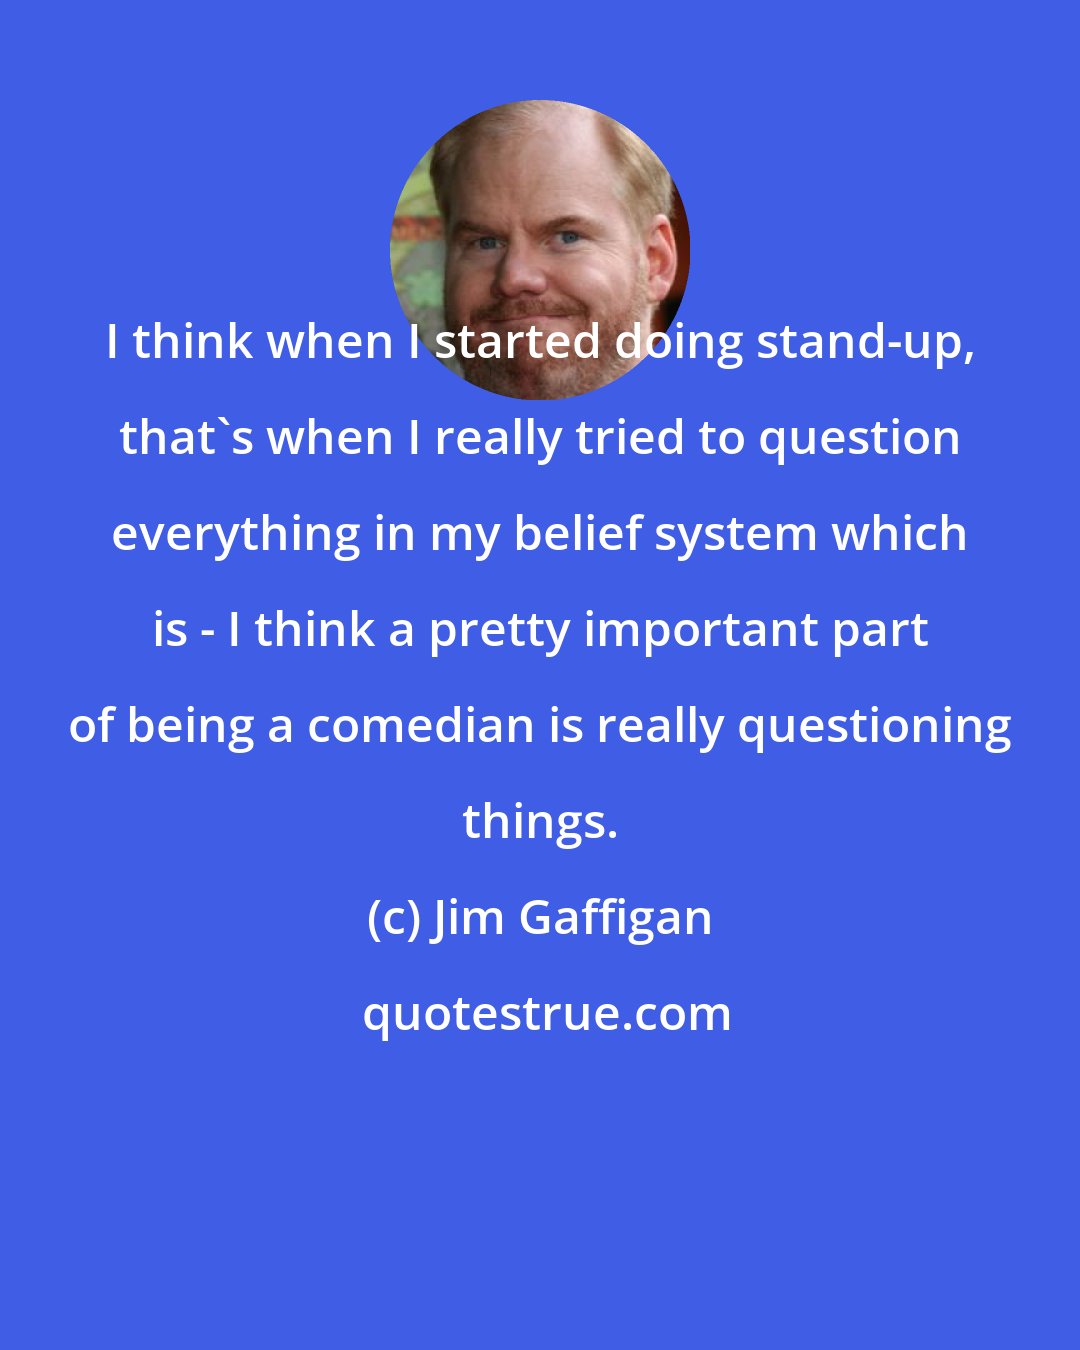 Jim Gaffigan: I think when I started doing stand-up, that's when I really tried to question everything in my belief system which is - I think a pretty important part of being a comedian is really questioning things.